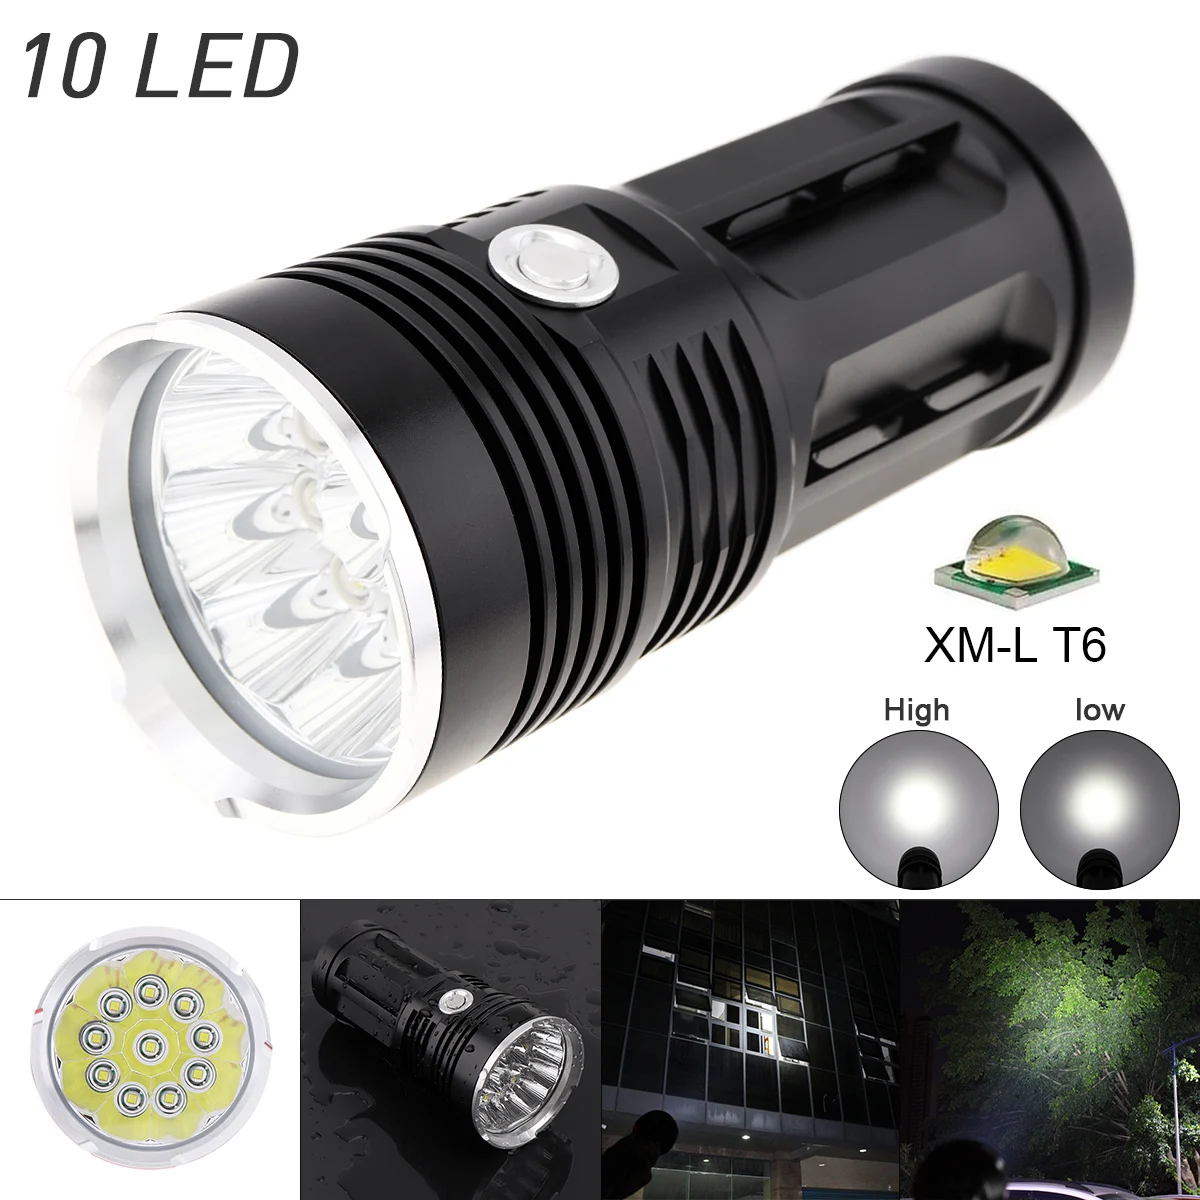 

SecurityIng Waterproof Flashlights Super Bright 3000LM 10 x XML-T6 LED Flash Light Torch Lamp with 3 Modes for Hunting/Fishing